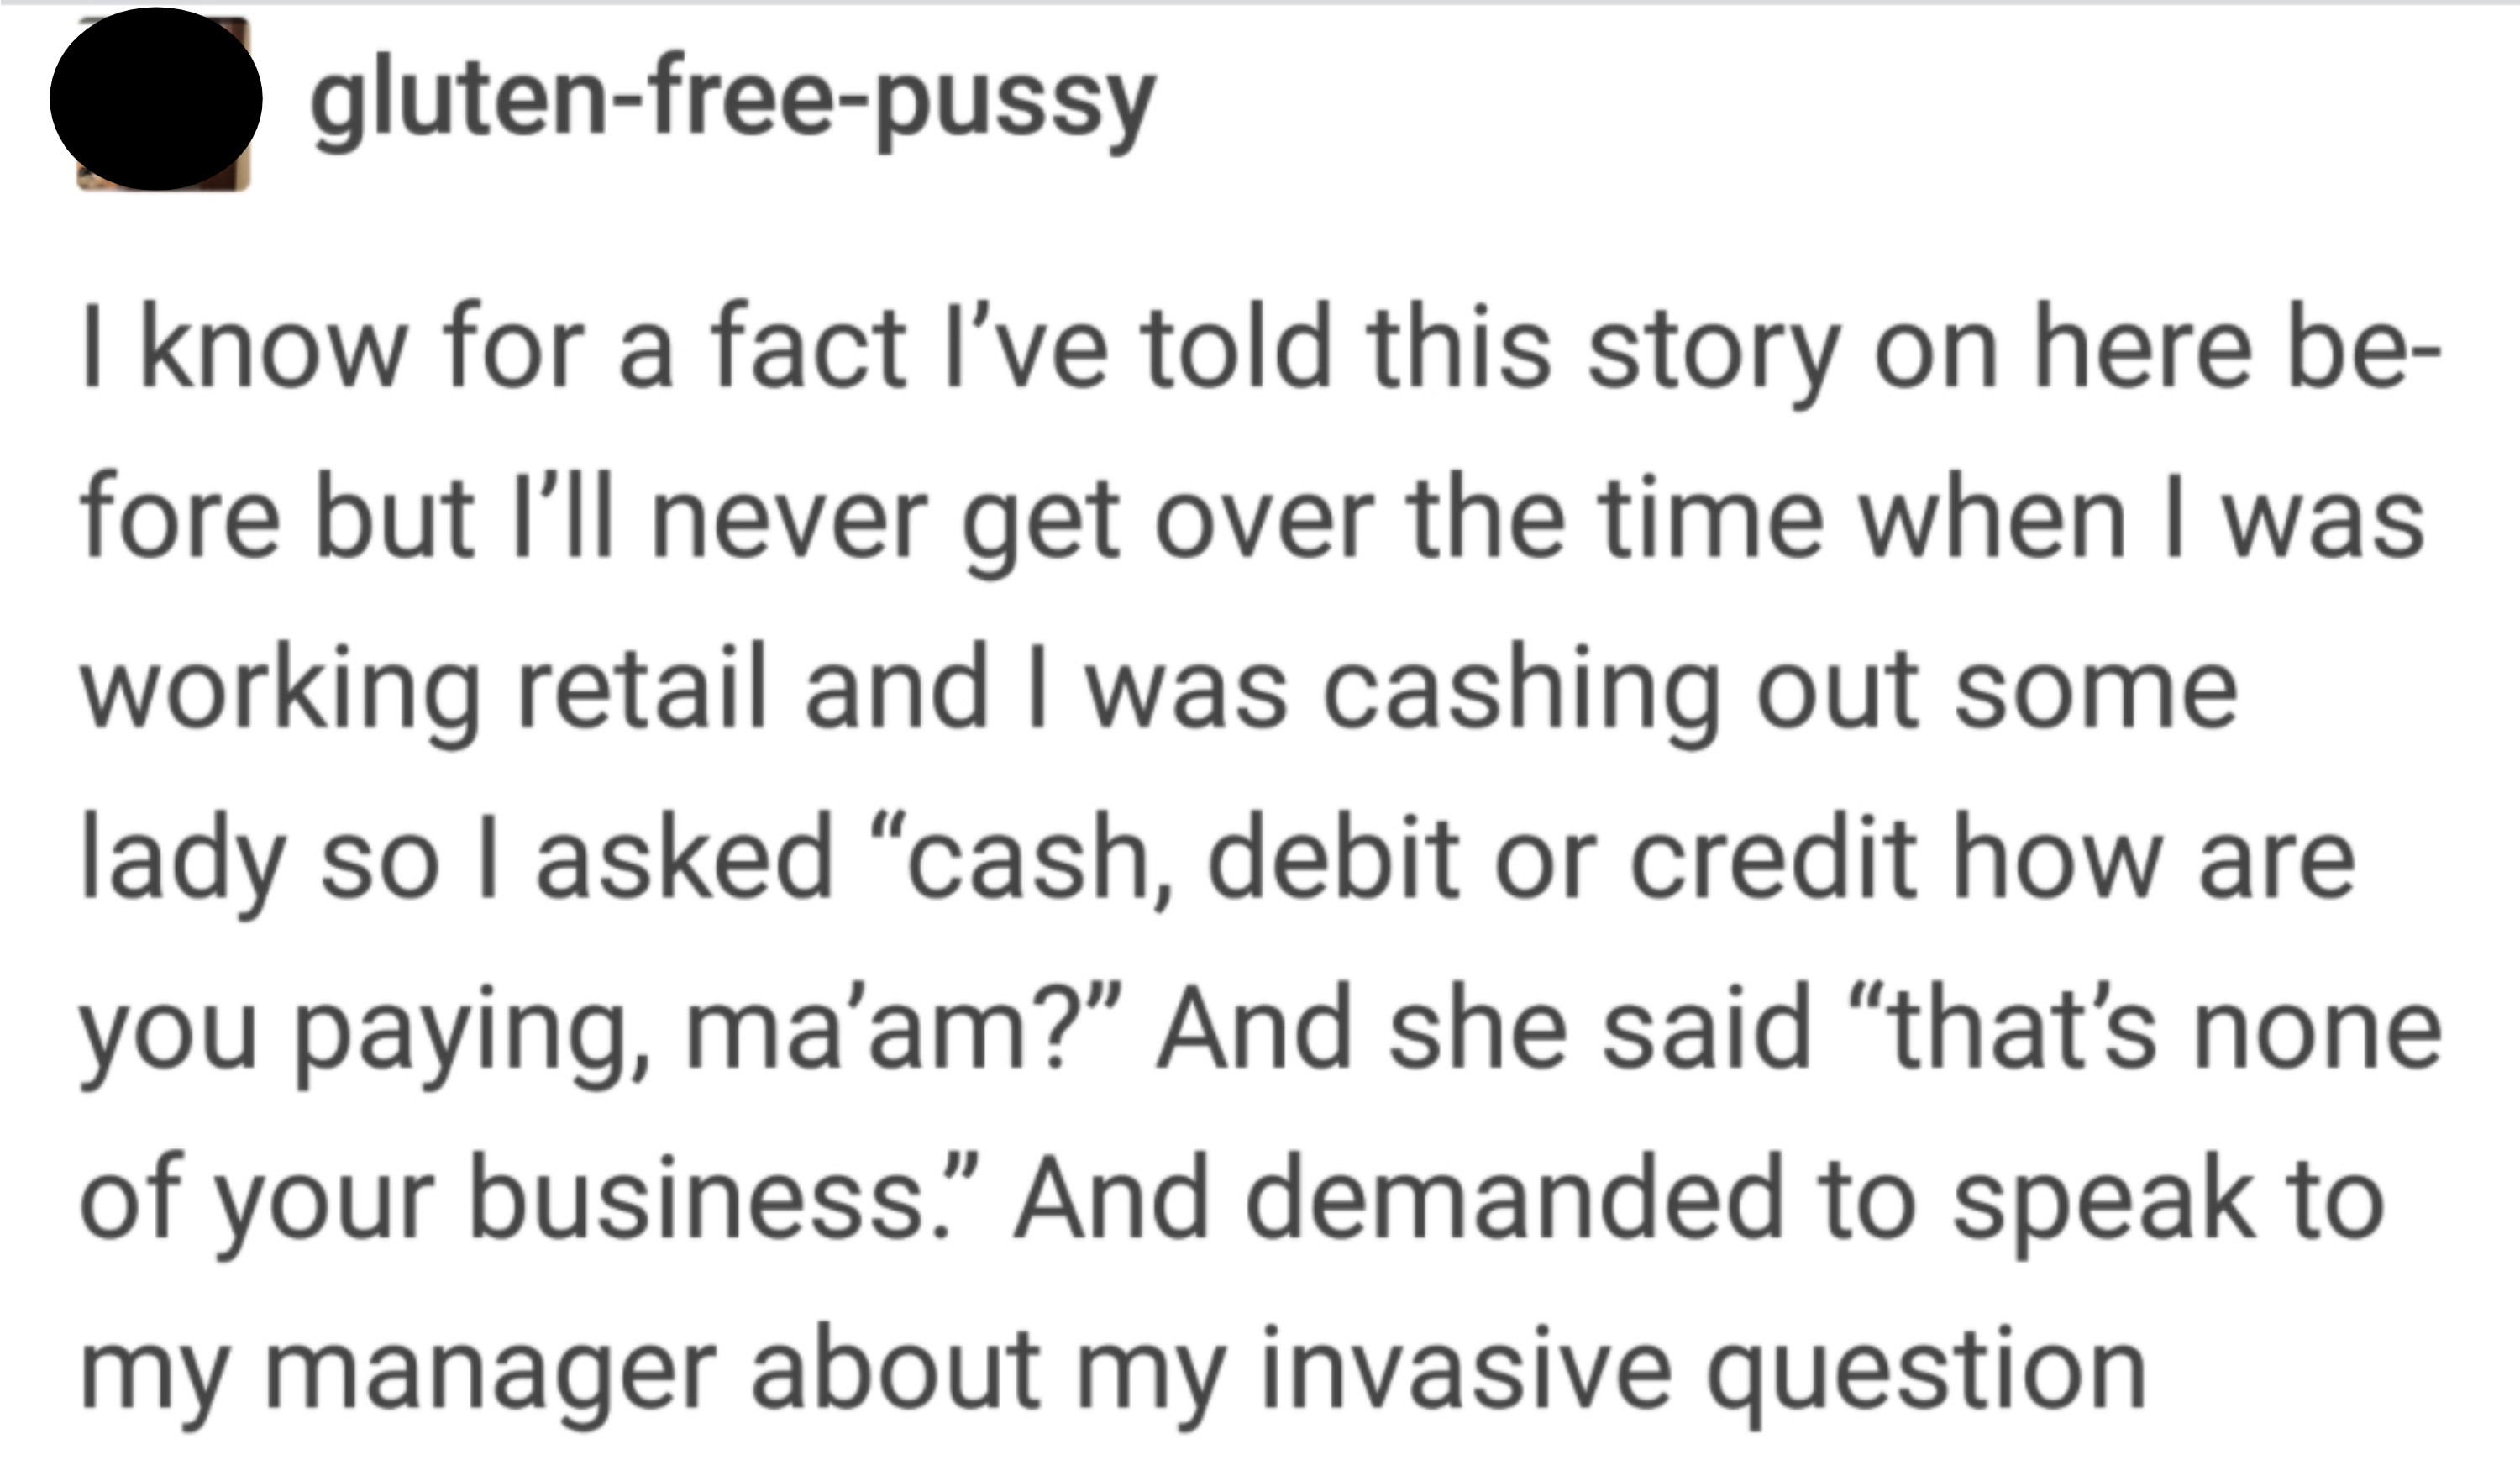 story about a customer who gets mad because they were asked how they plan to pay for something